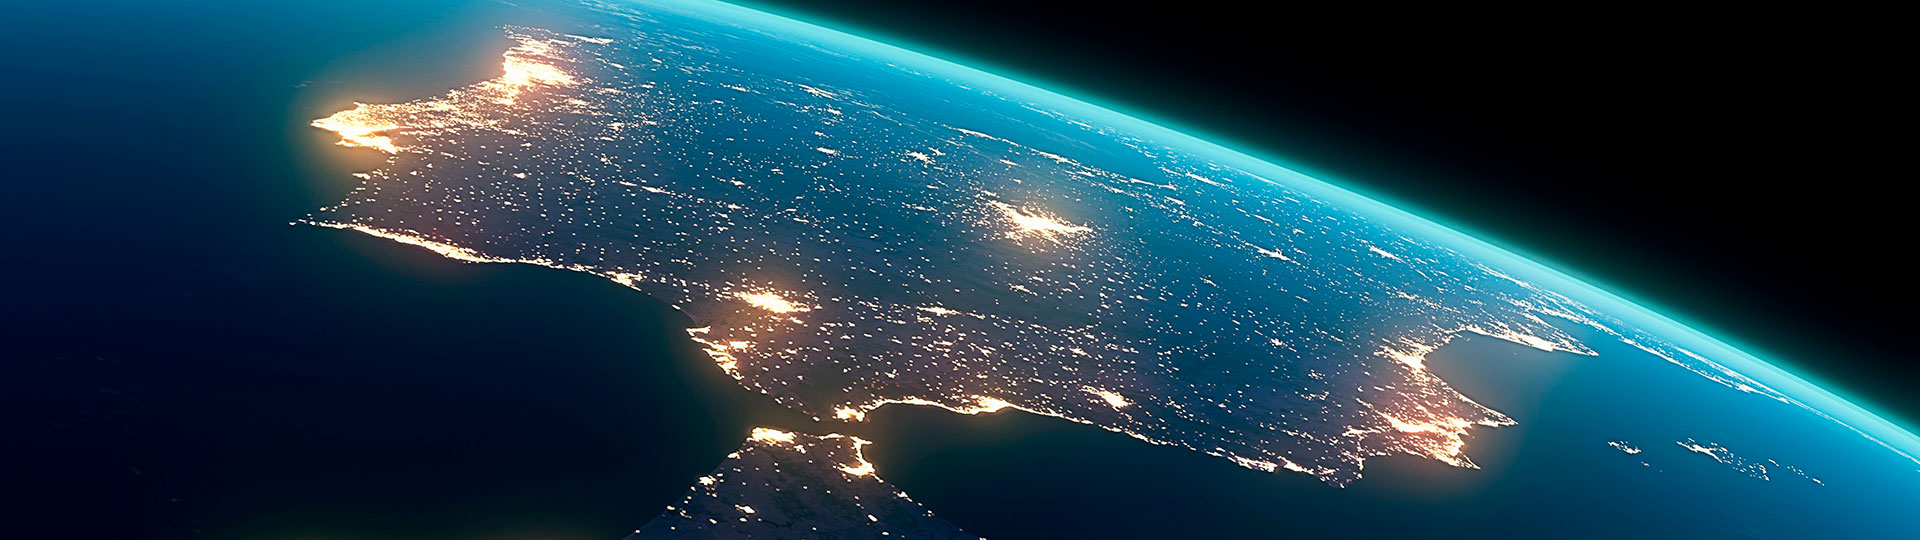 The Iberian Peninsula from space